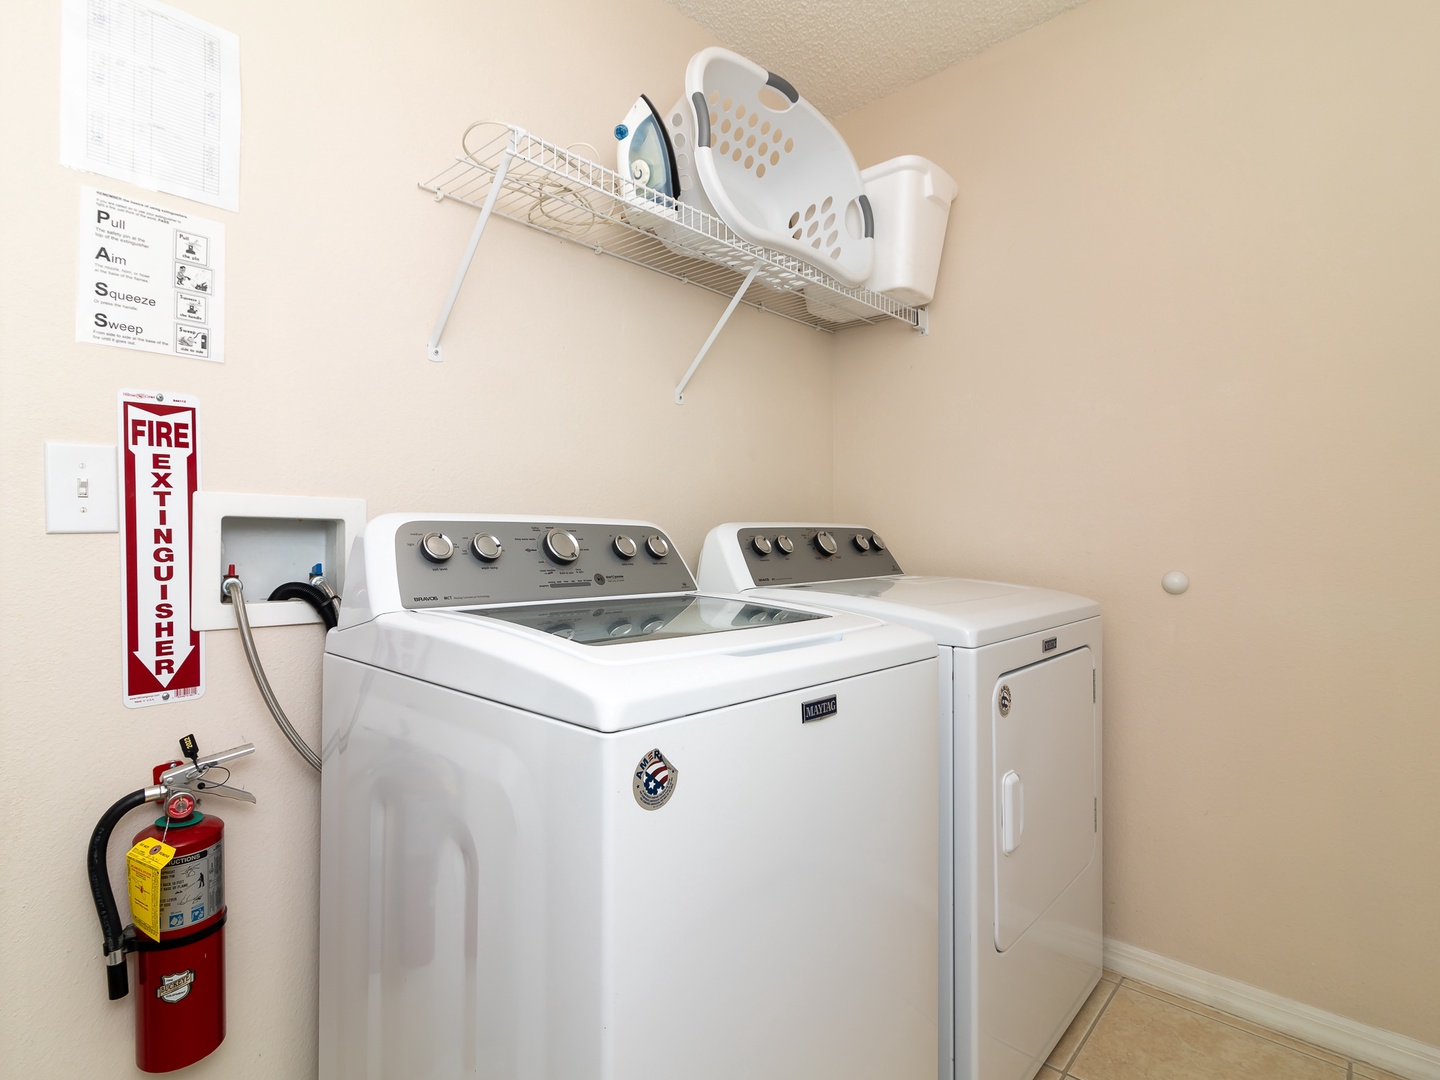 Laundry within the home